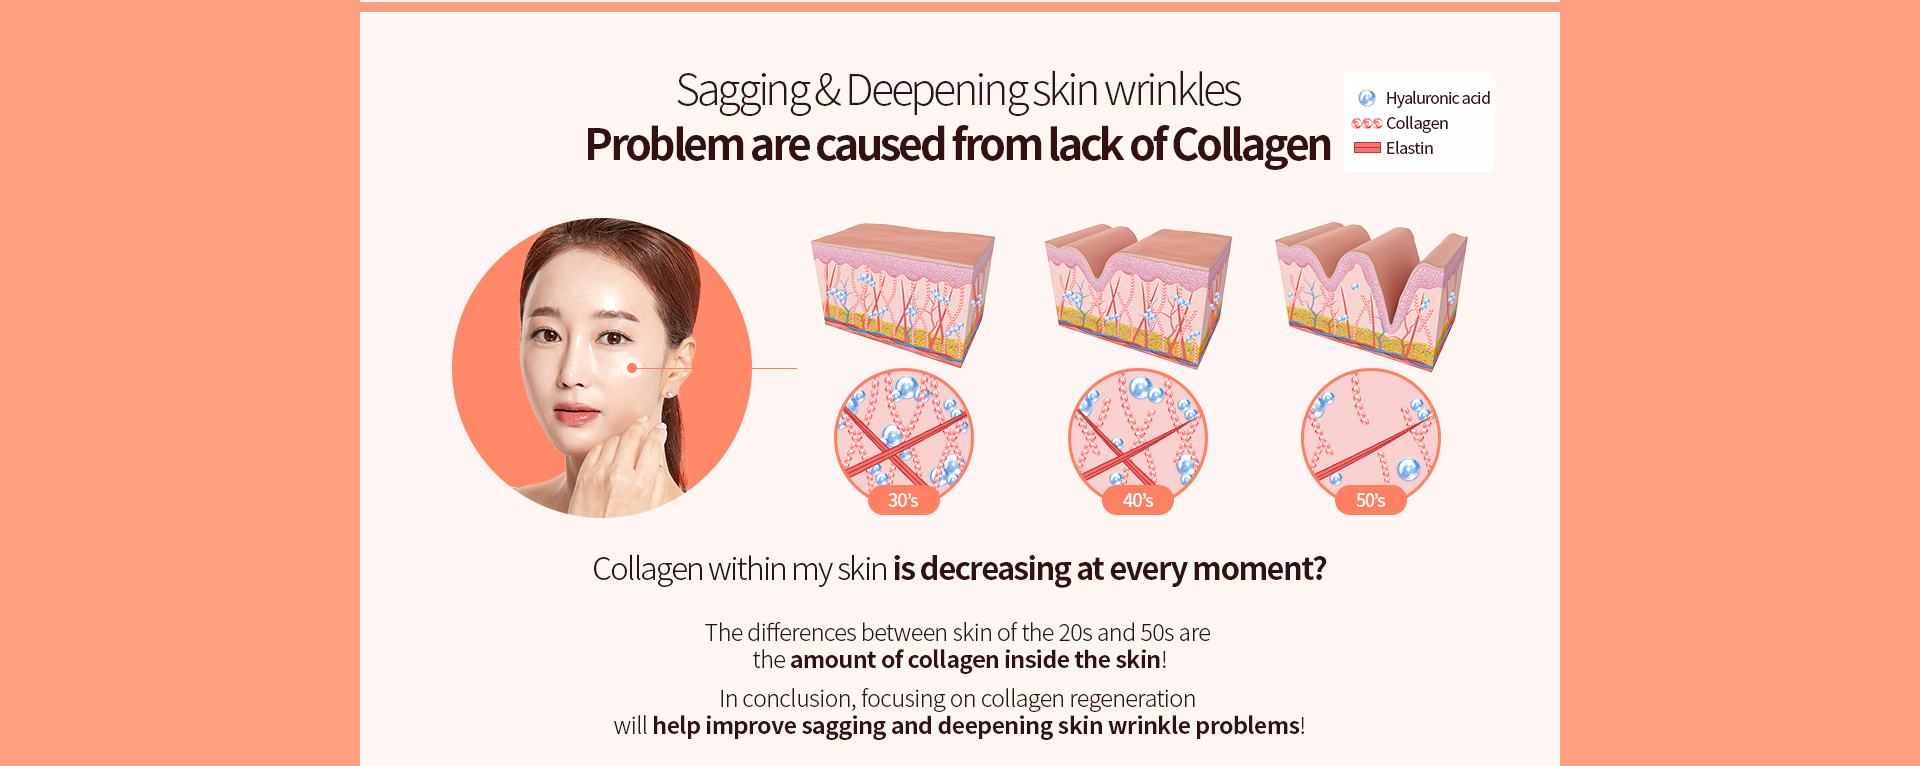 The differences between skin of the 20s and 50s are the amount of collagen inside the skin